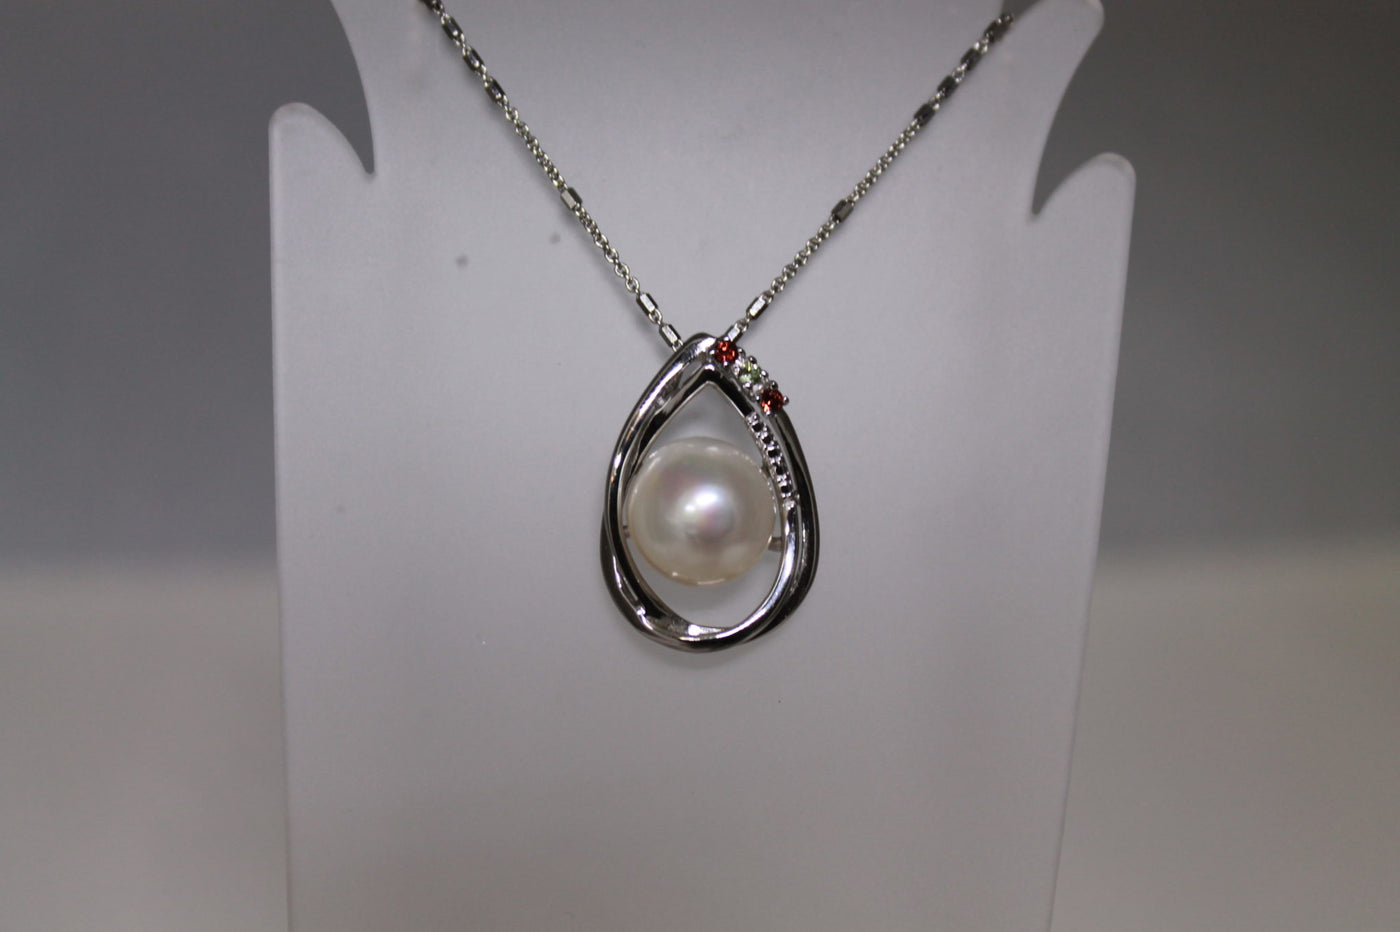 14mm white pearl and gems pendant set in Sterling Silver